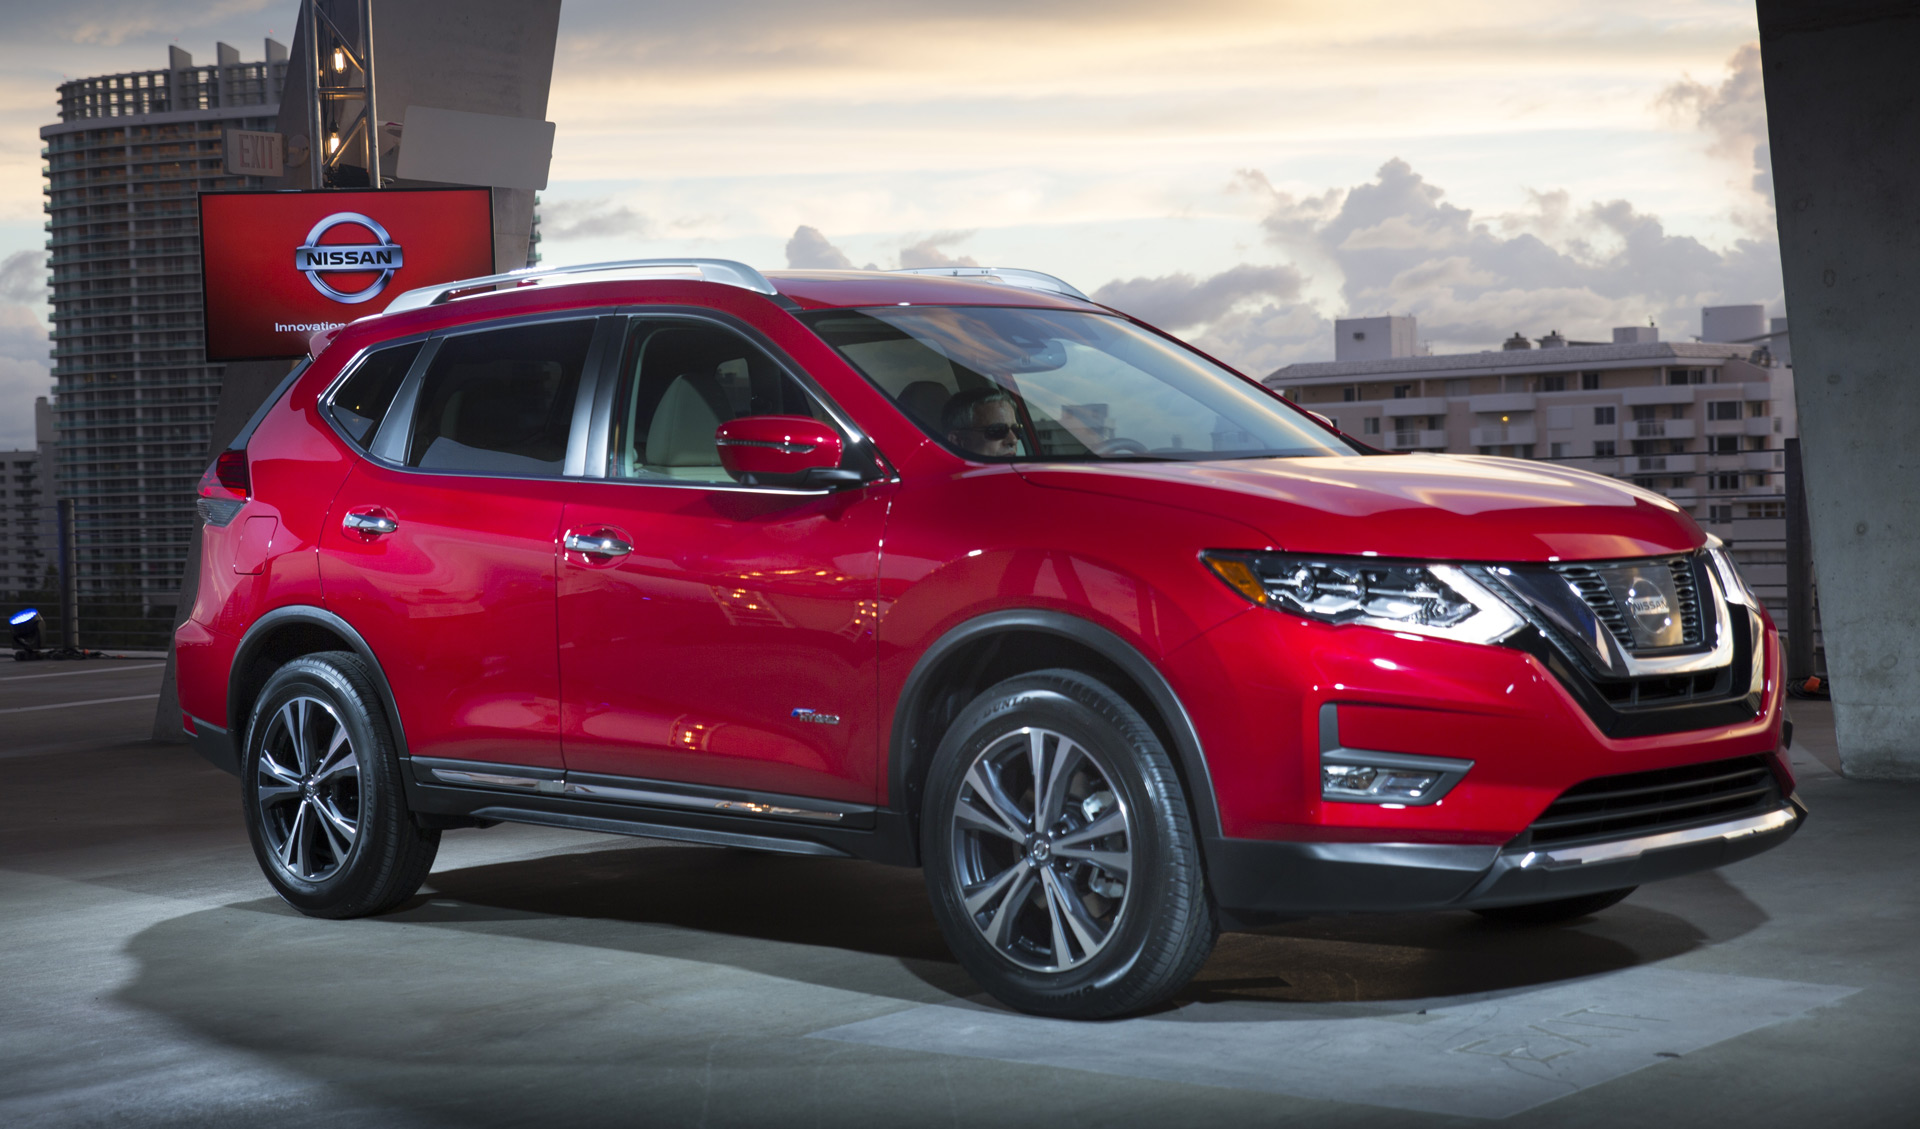 2017 Nissan Rogue Hybrid: better prospects than Pathfinder, Murano for  small hybrid SUV?